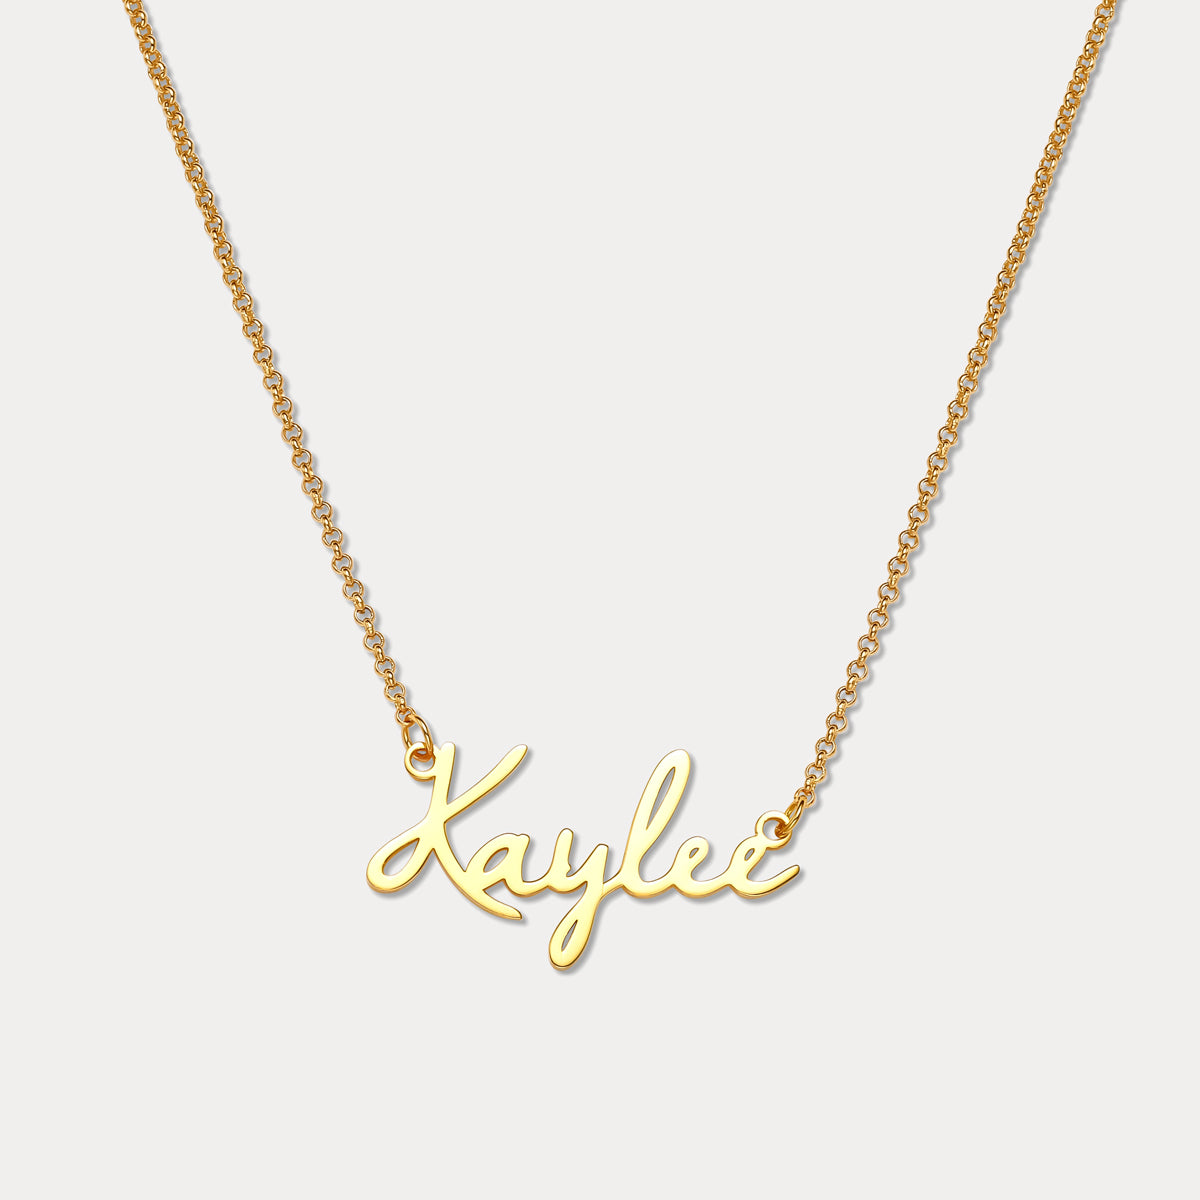 Selenichast fairy name necklace